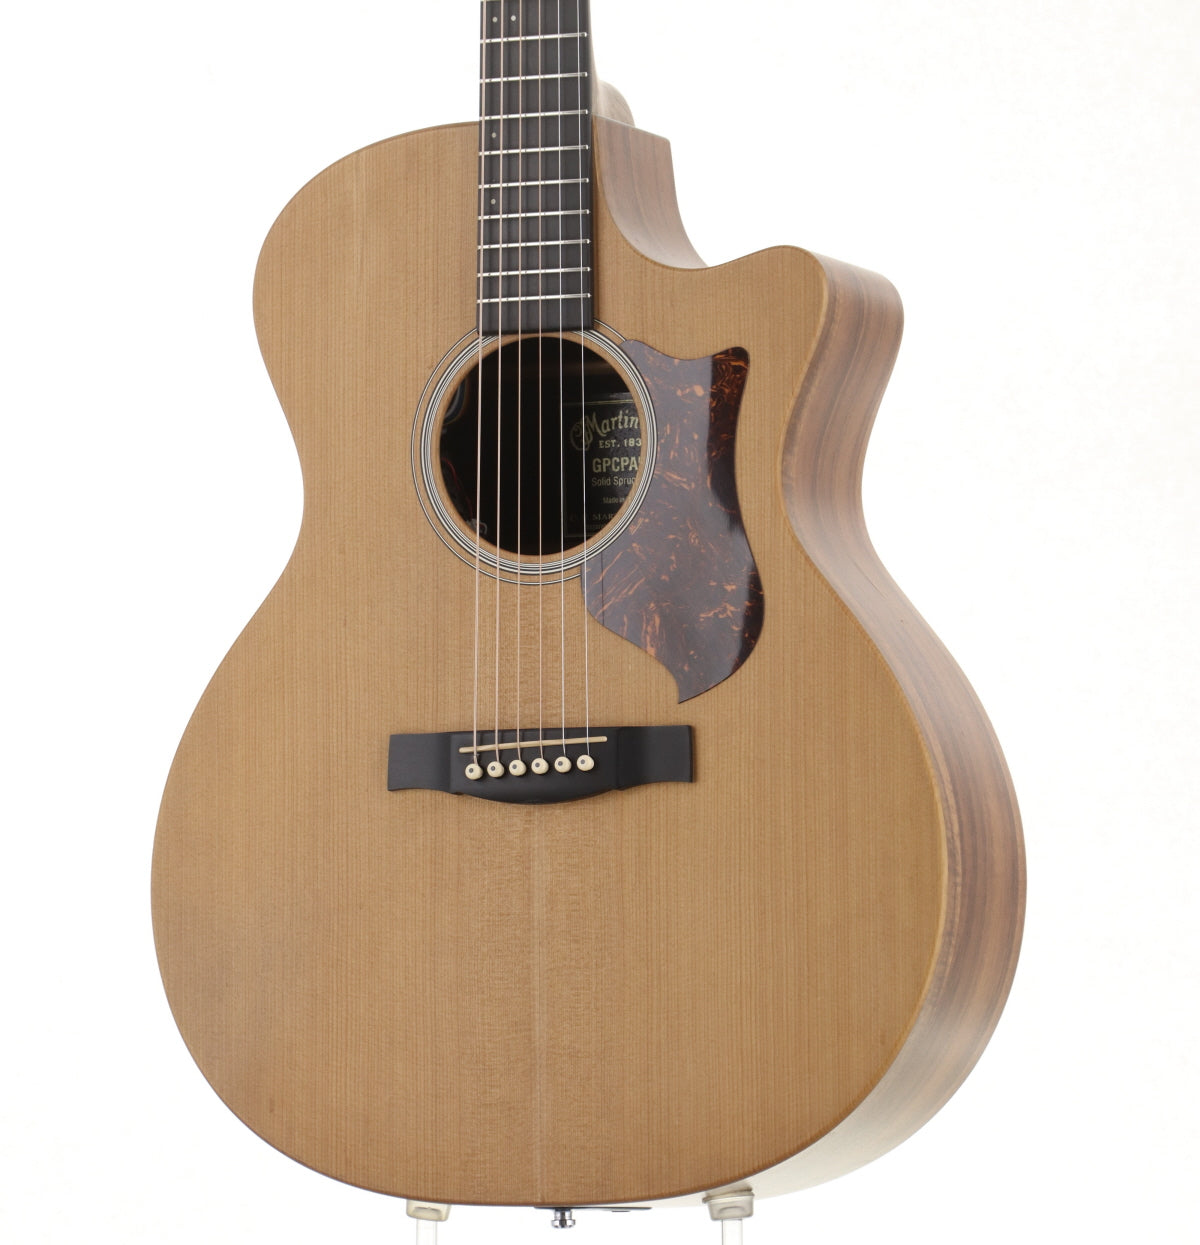 [SN 1719253] USED Martin / Performing Artist Series GPCPA5K made in 2013 [09]